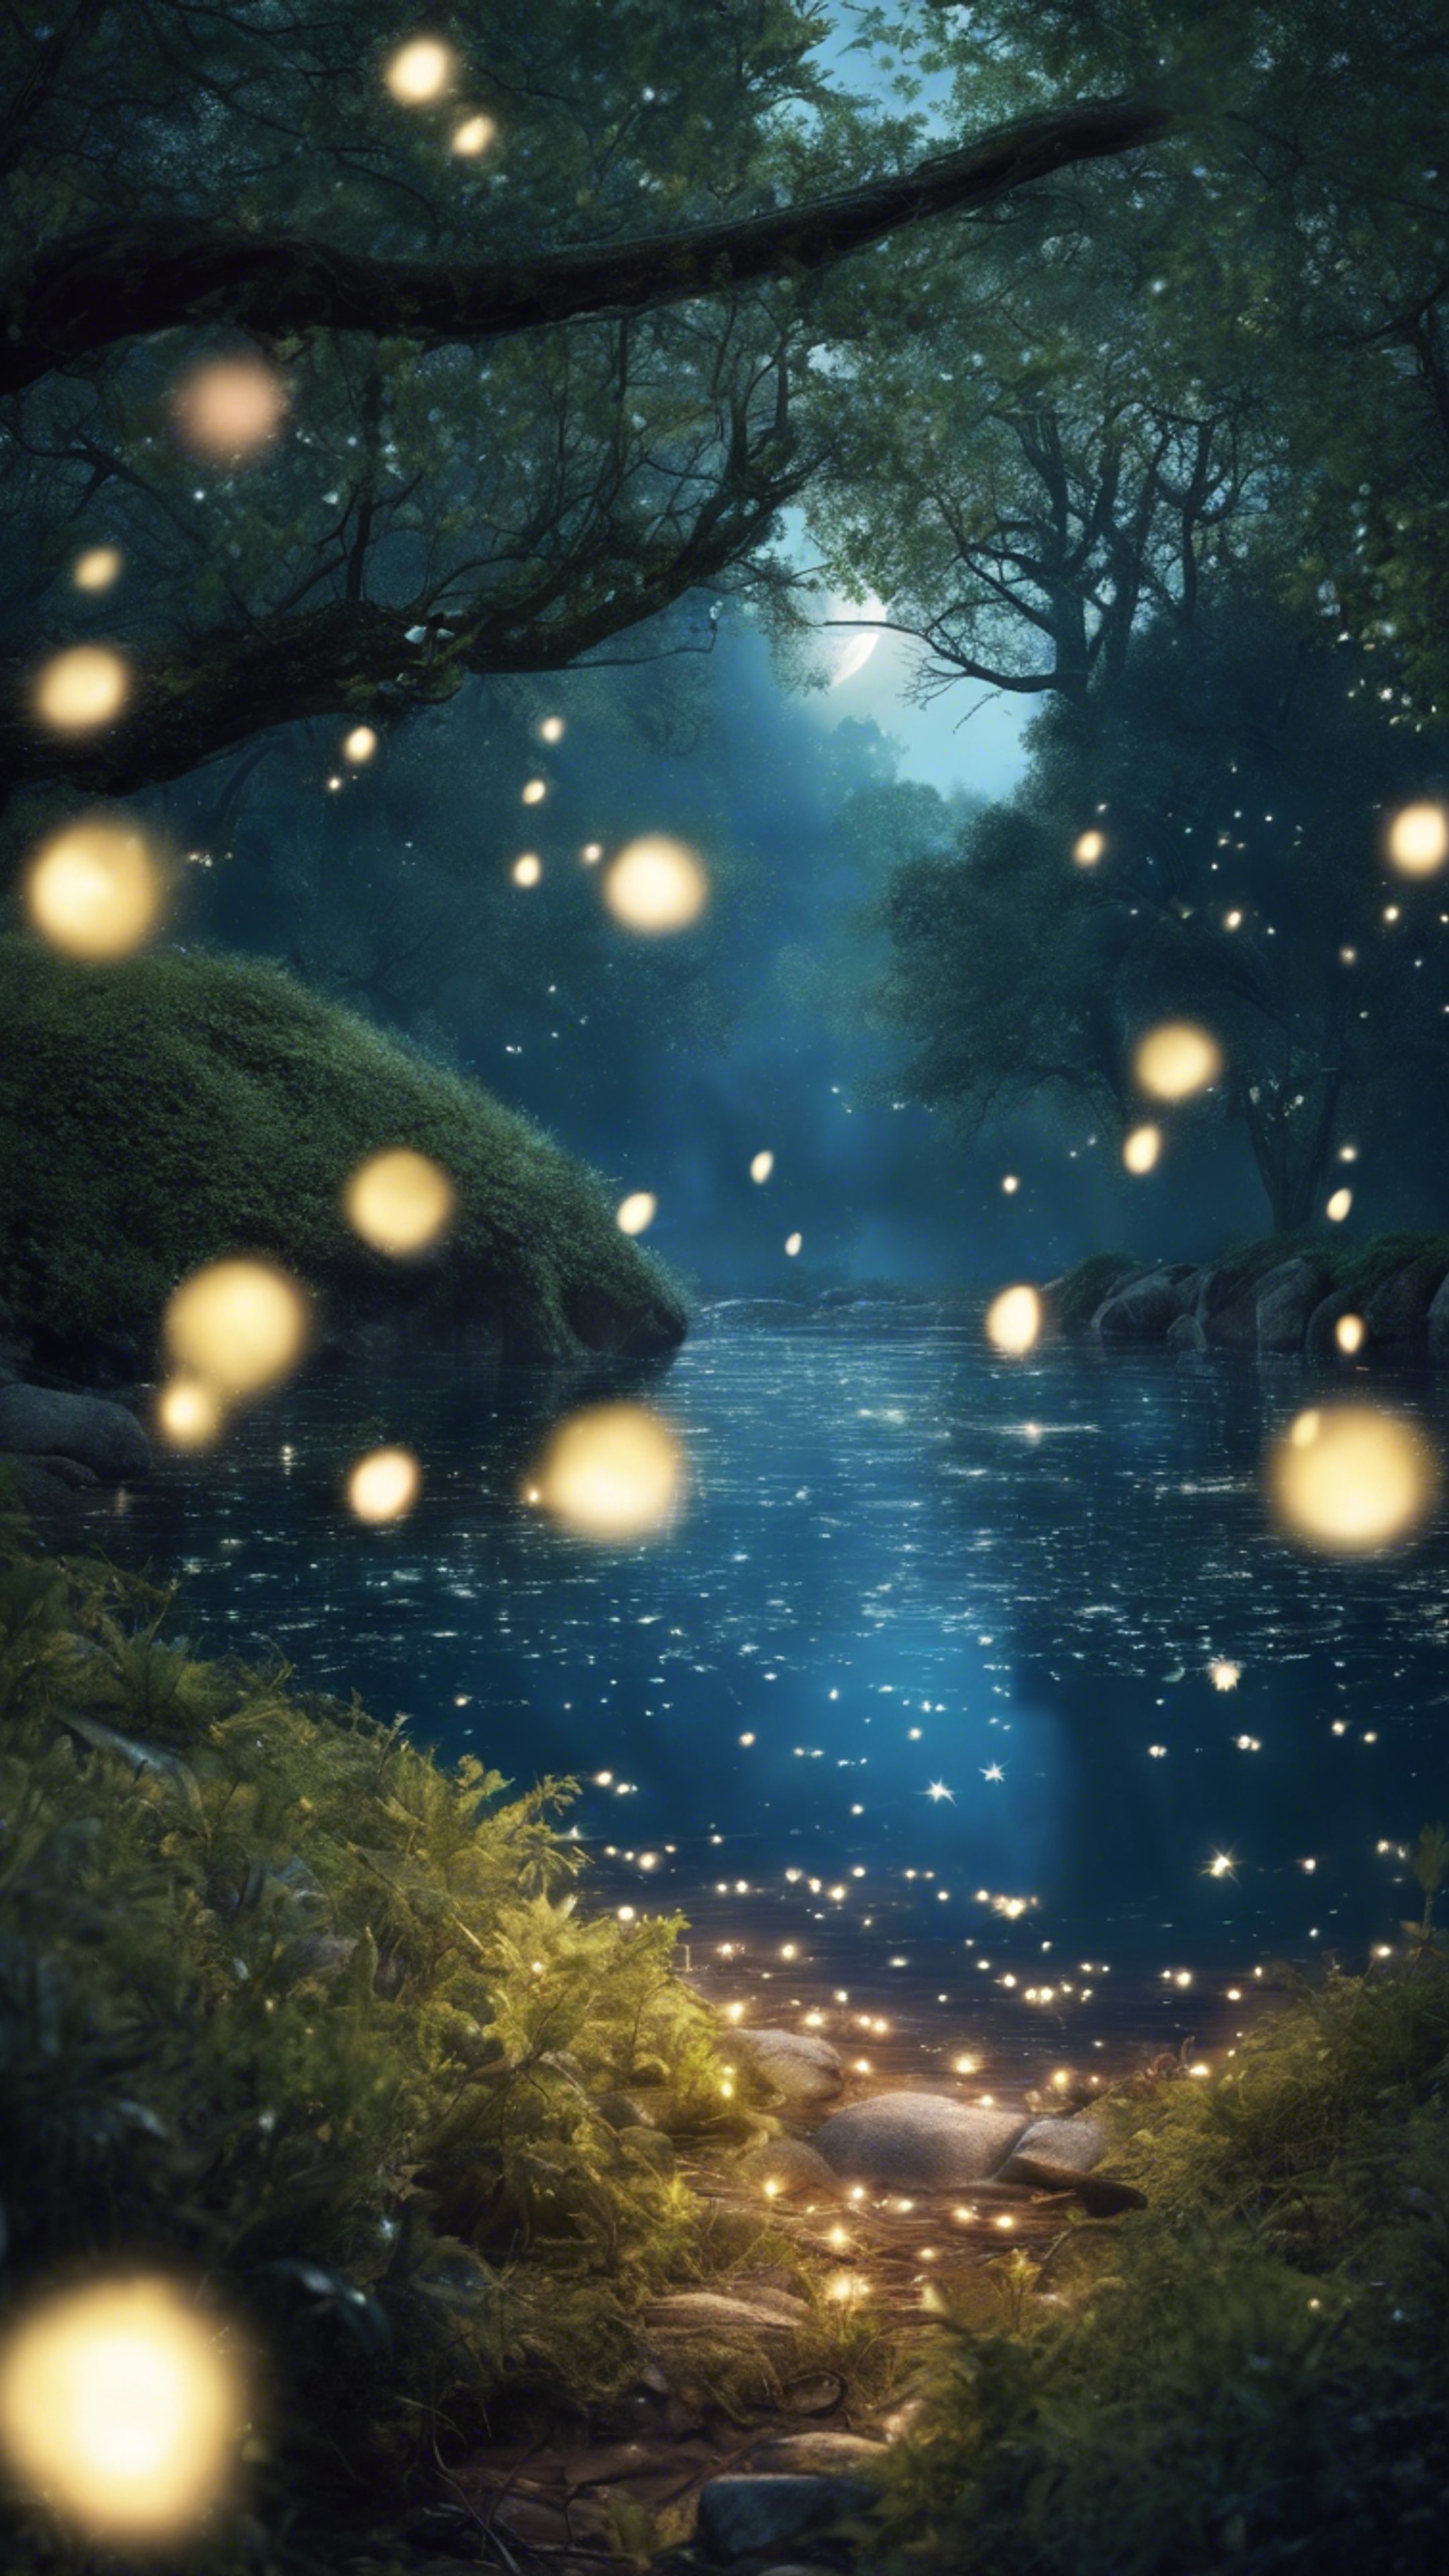 An enchanted forest lit up by midnight blue fireflies, with a river gleaming under the silver moon. Wallpaper[9c93675377644e8e8e21]